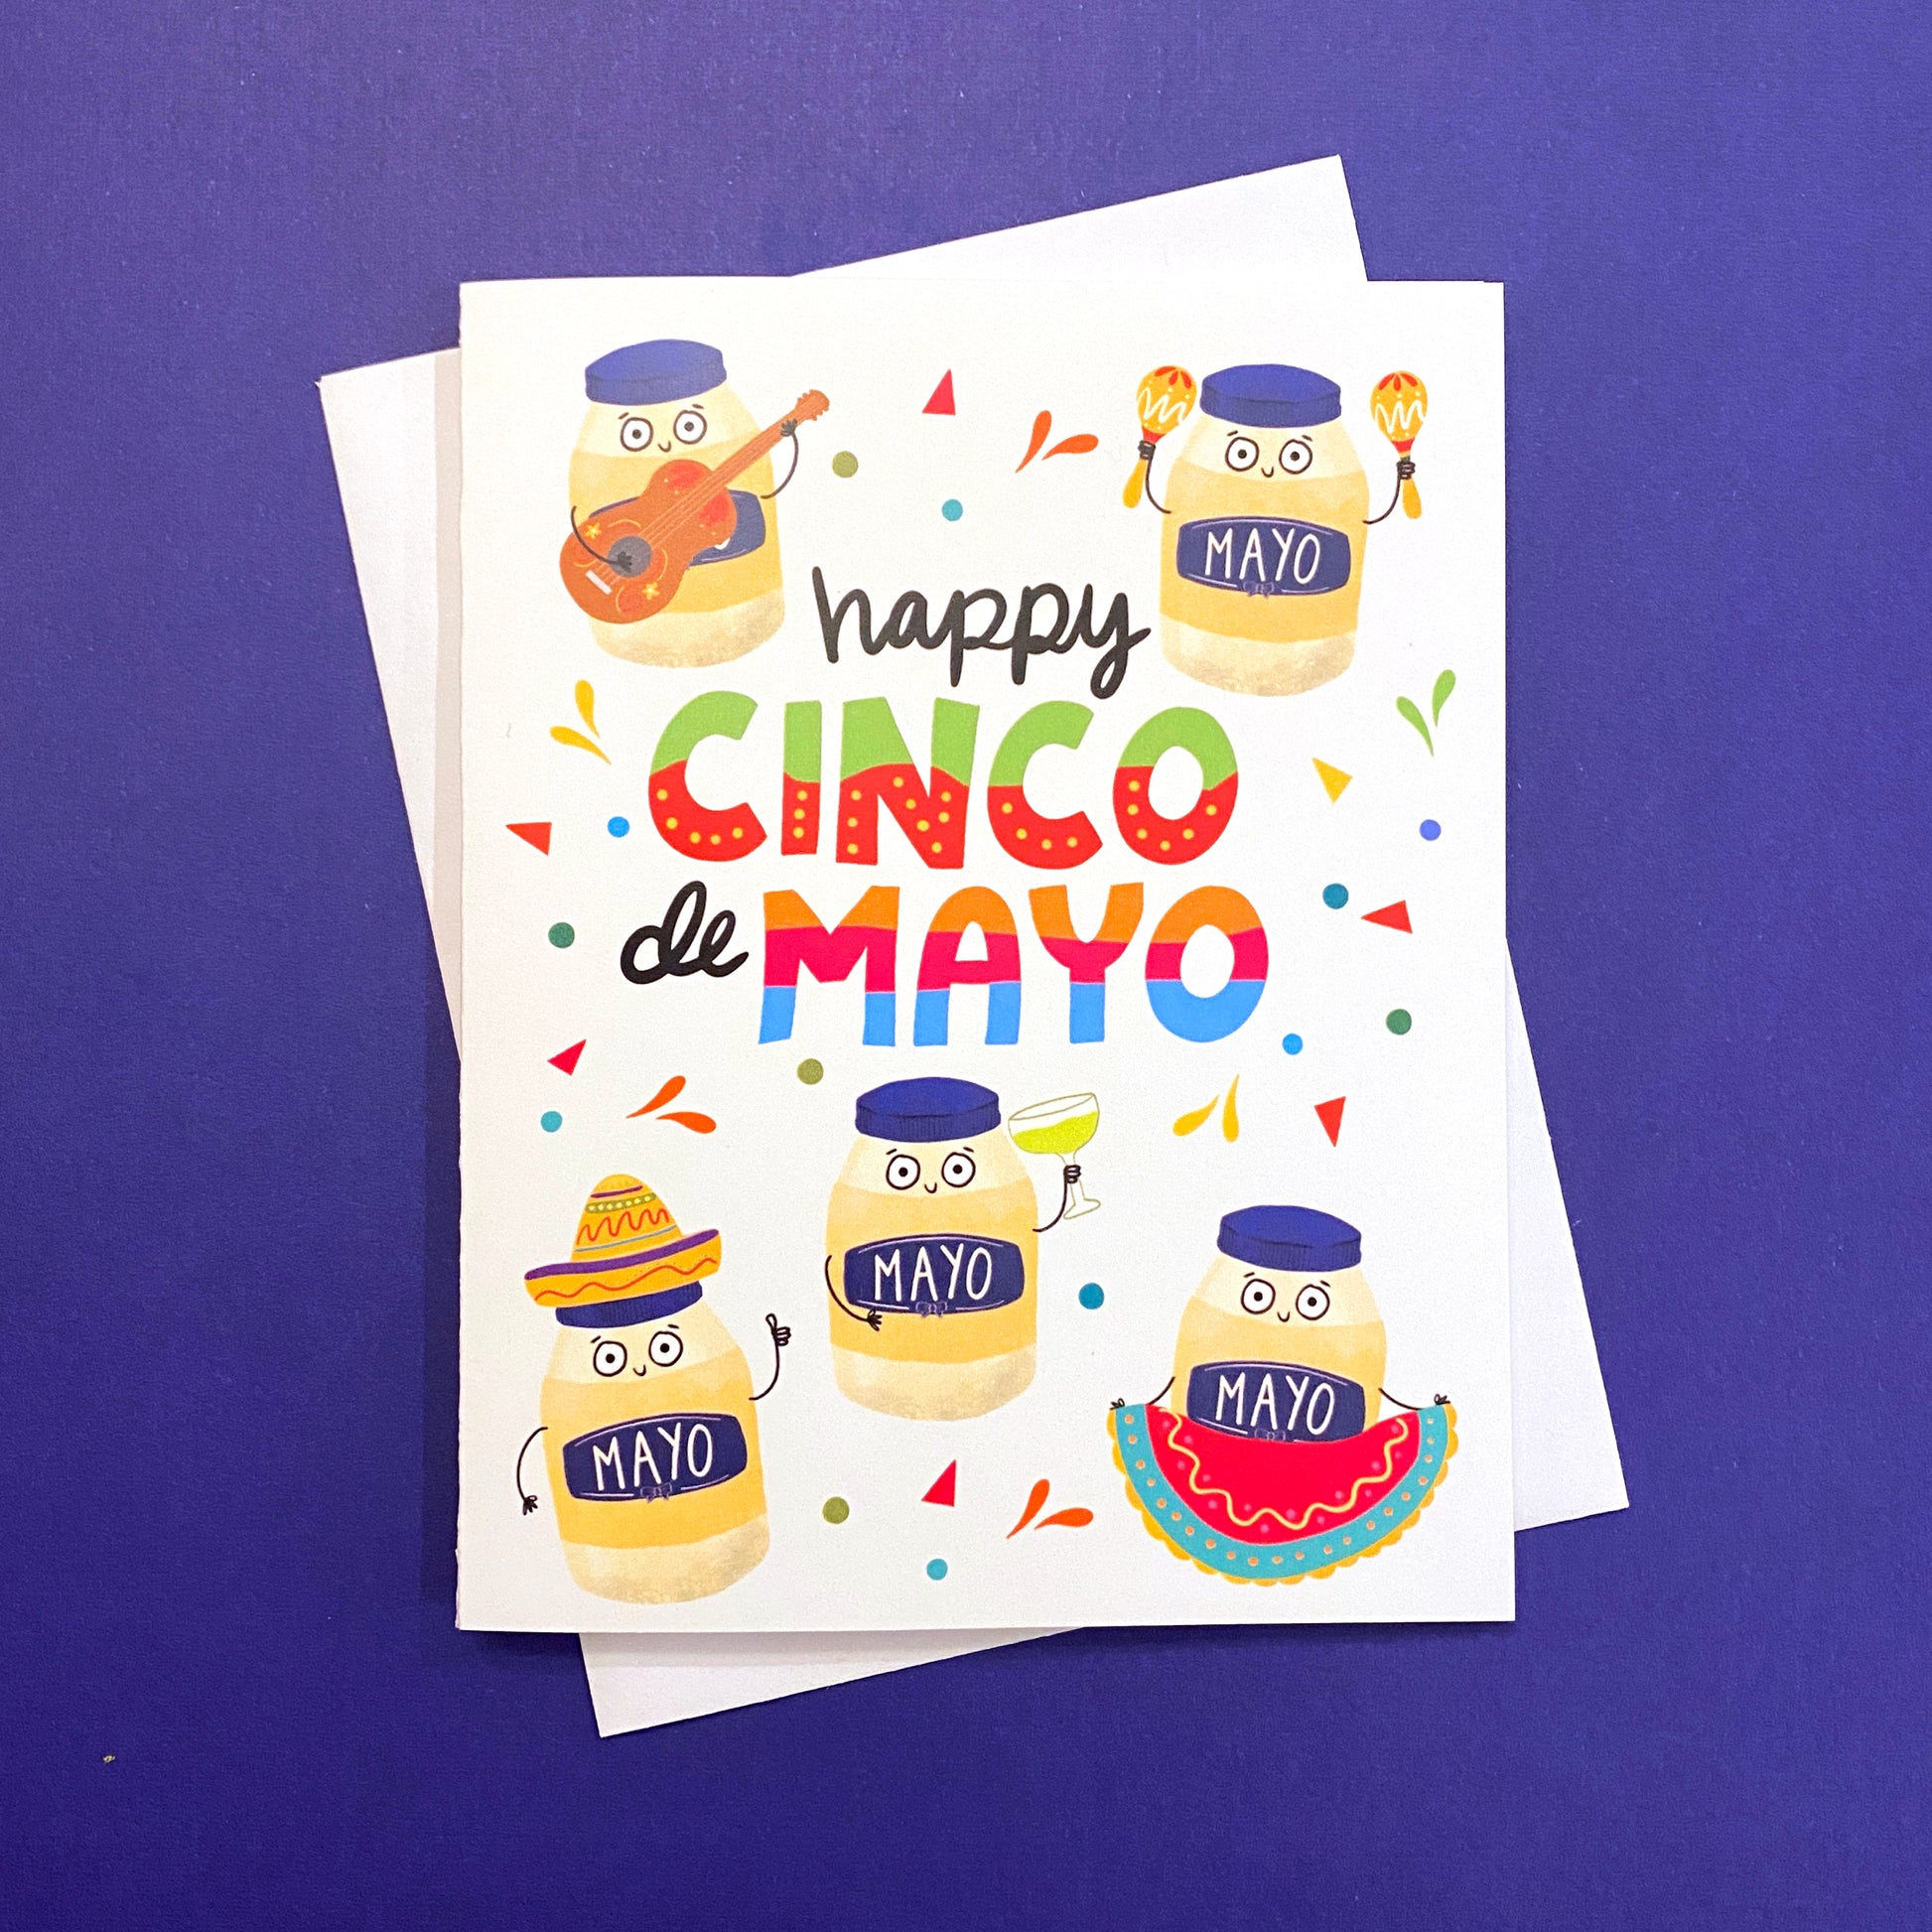 Funny Cinco De Mayo card with celebratory jars of mayo! Size A2 greeting card (4.25" x 5.5") with envelope, blank Inside. All cards are designed and Illustrated with love by me, Anna Fox, and are printed at my friendly neighborhood print shop in Denver, CO.